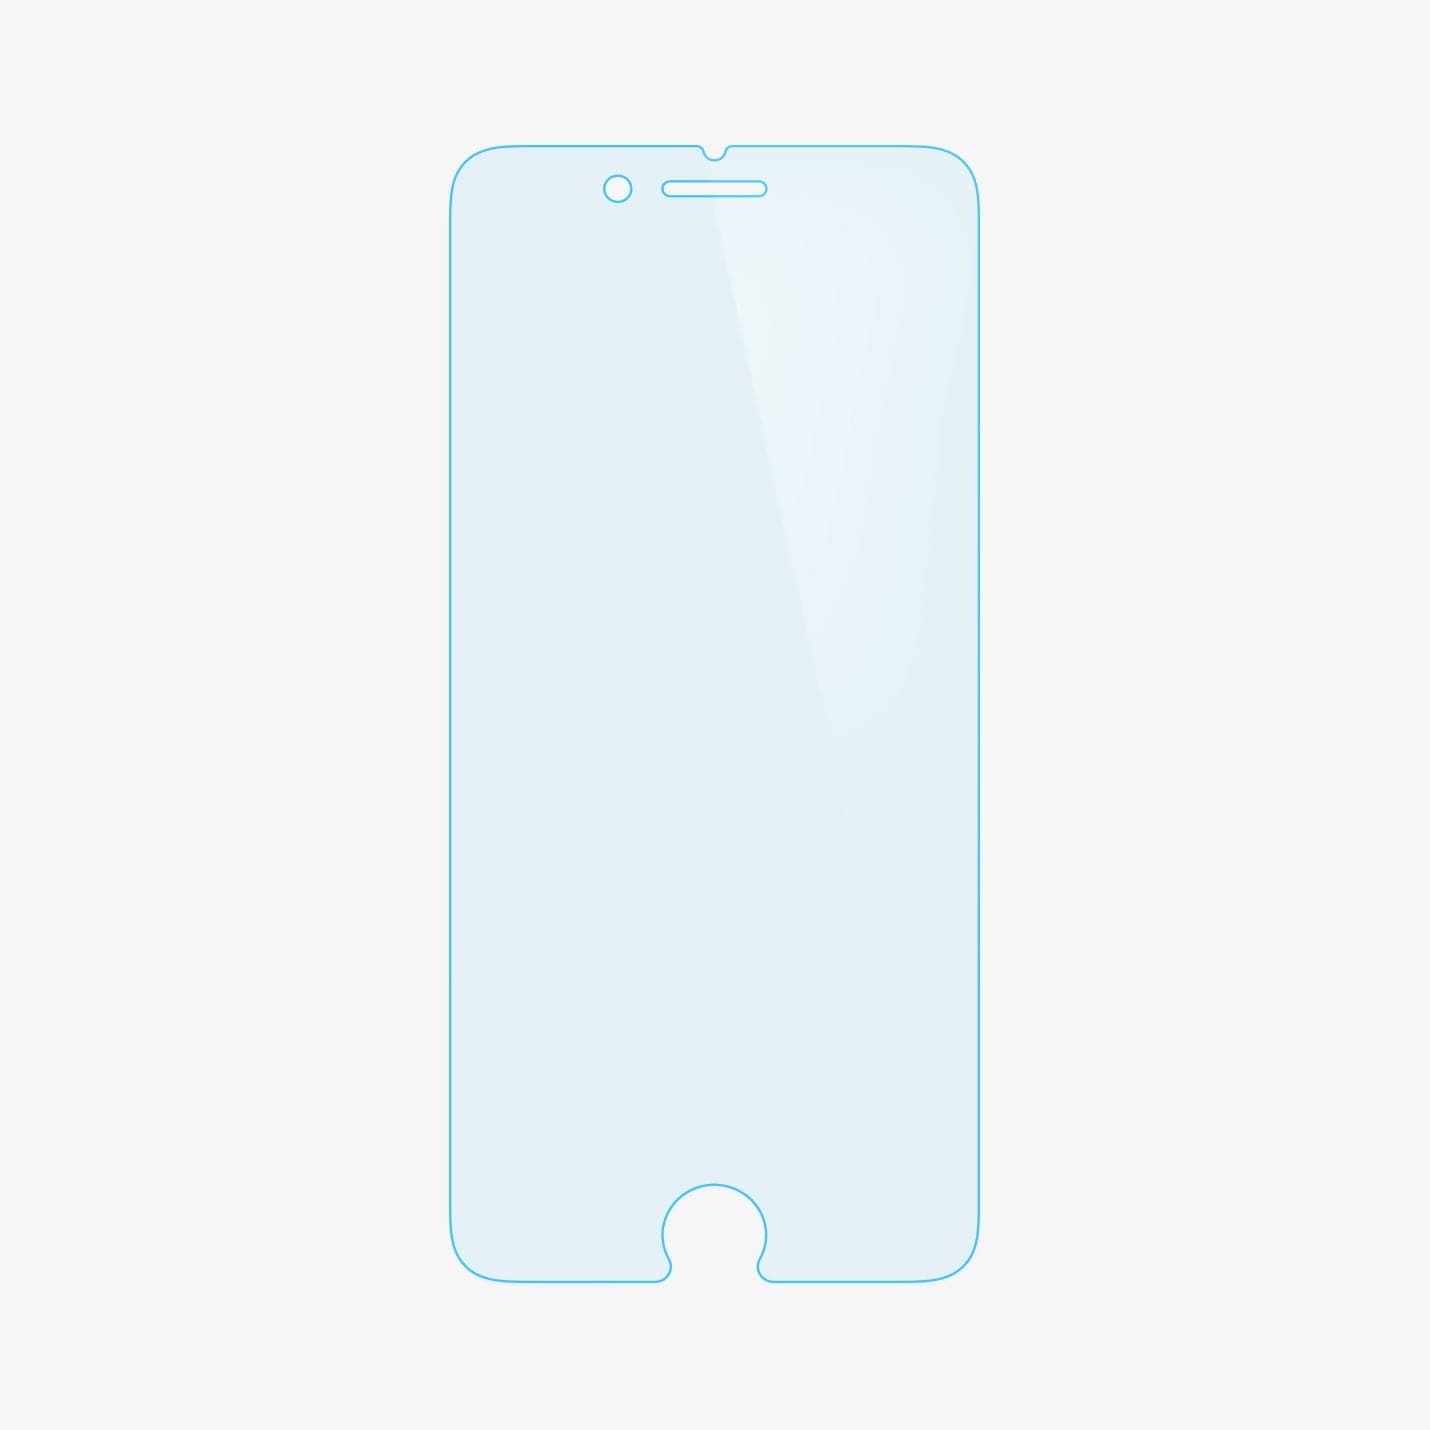 043FL20465 - iPhone 8 Plus Crystal Screen Protector showing front